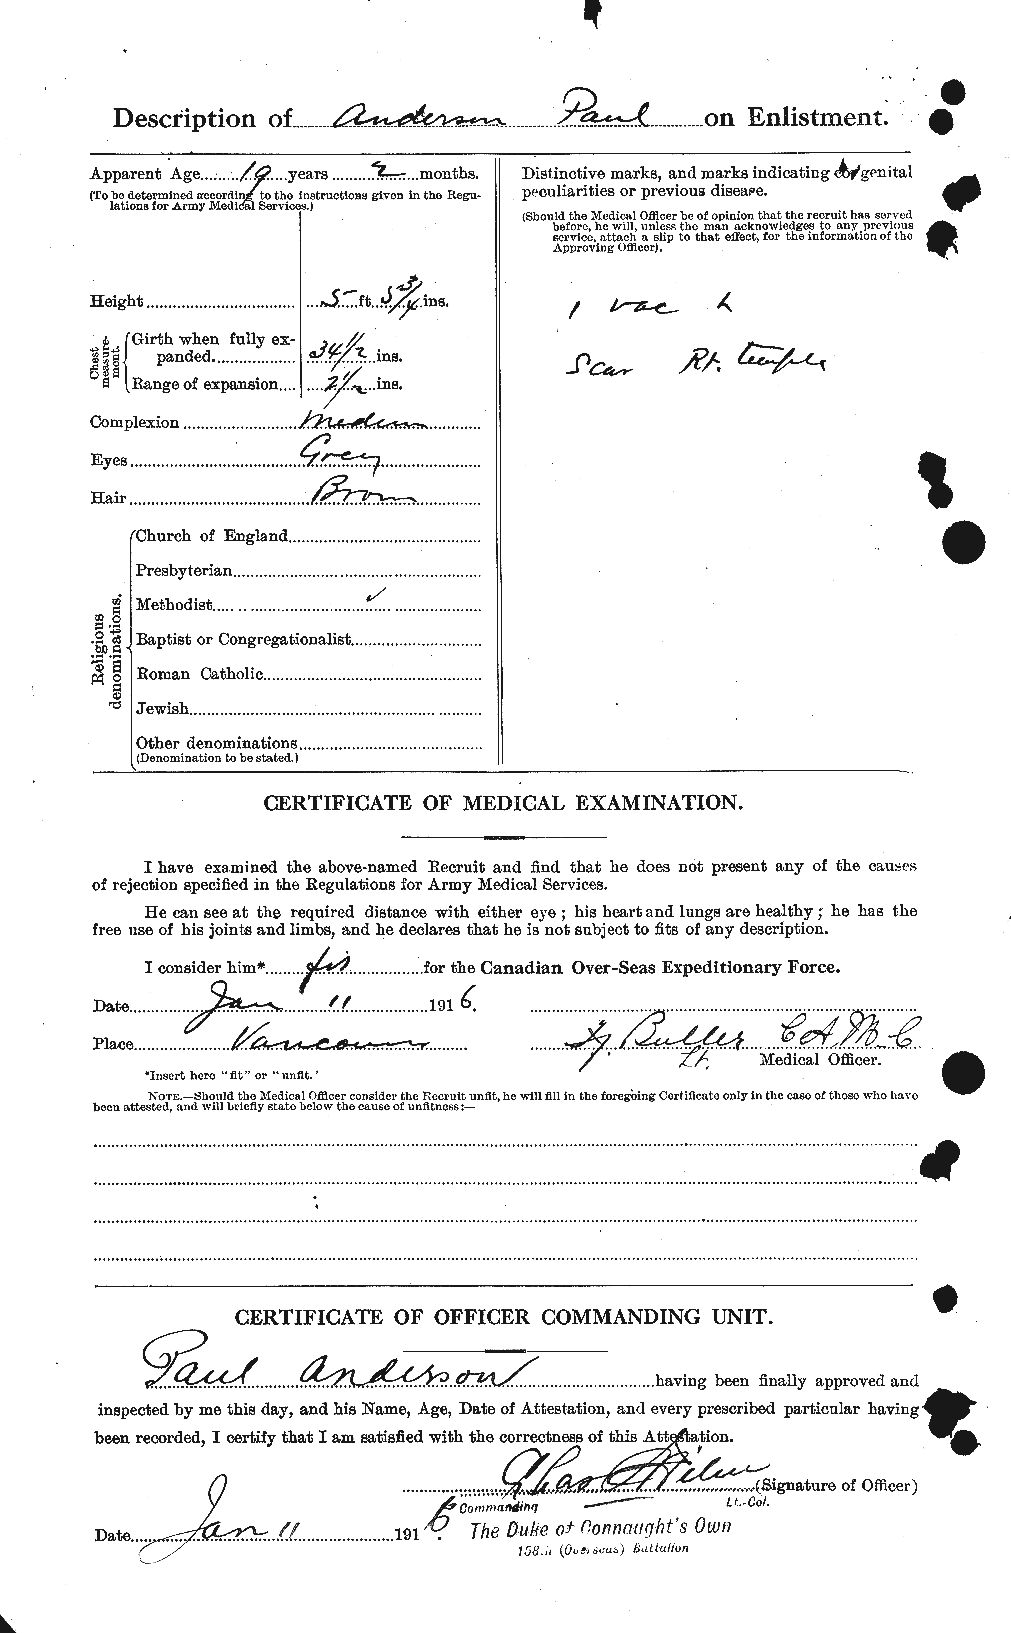 Personnel Records of the First World War - CEF 207368b